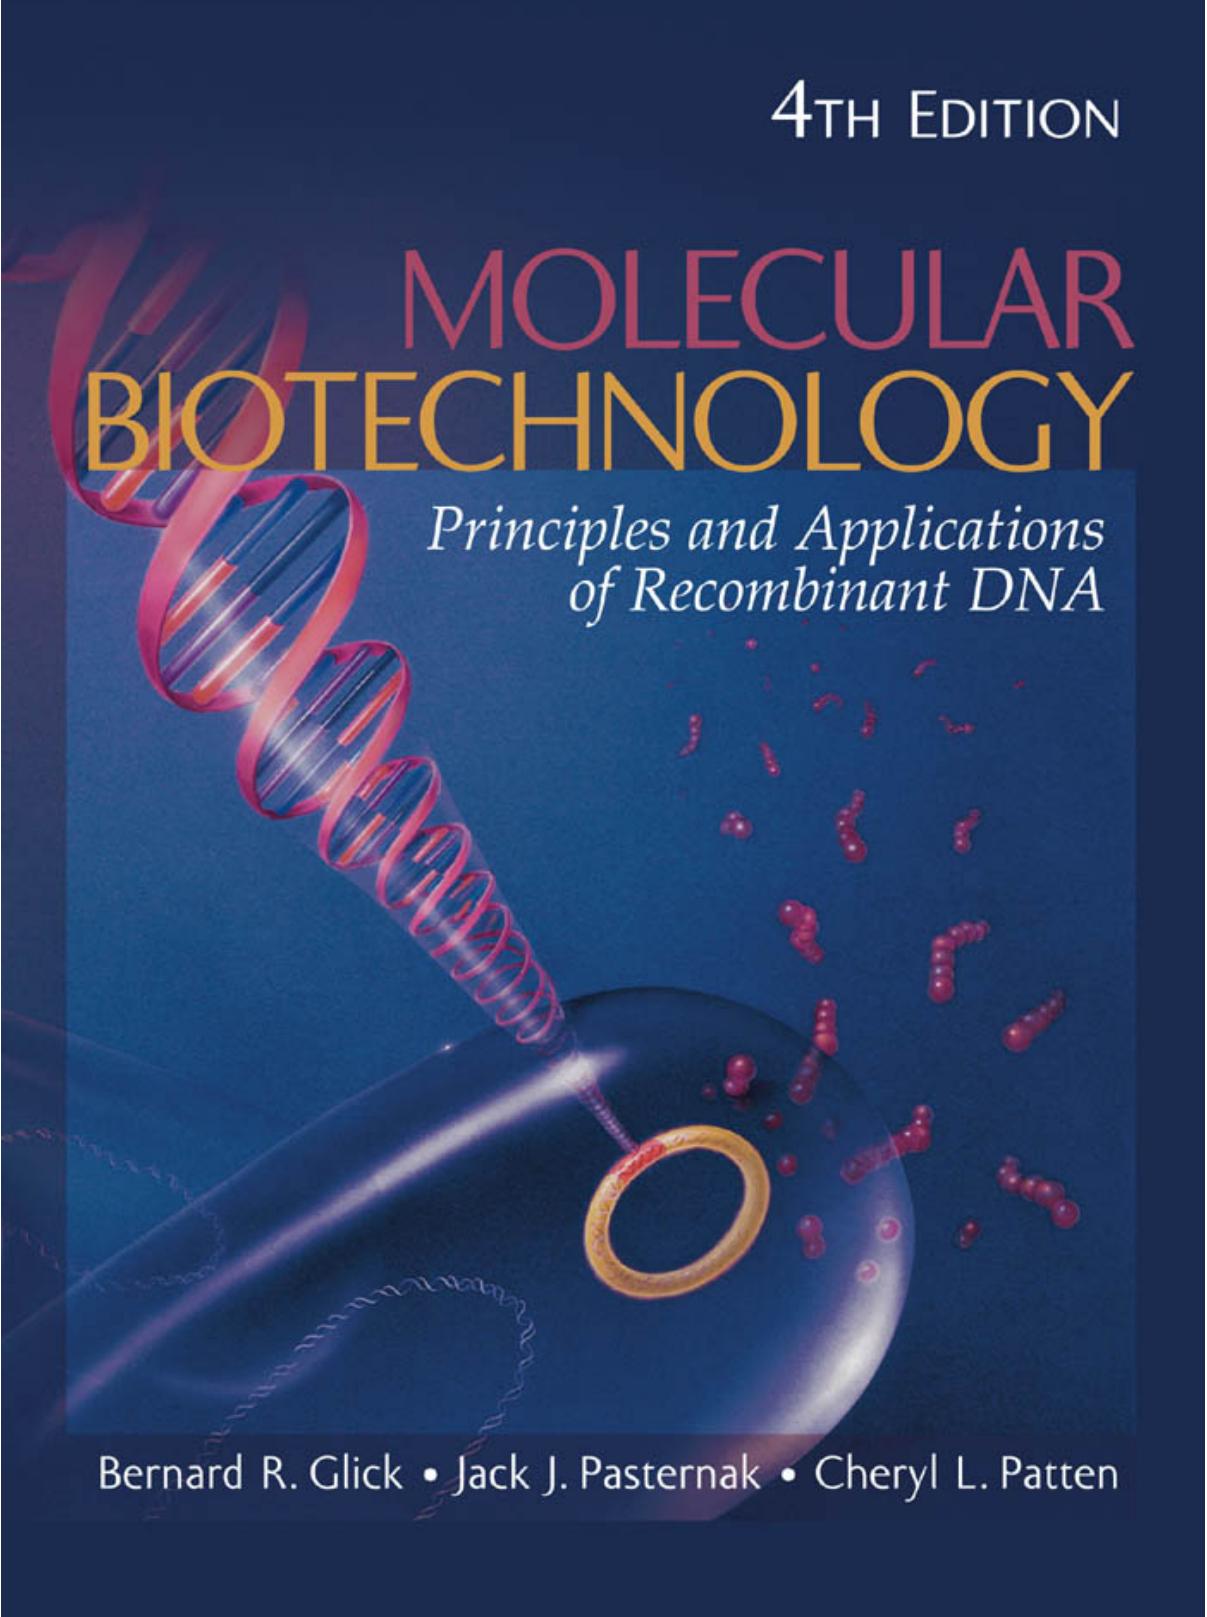 Molecular Biotechnology : Principles and Applications of Recombinant DNA (4th Edition)